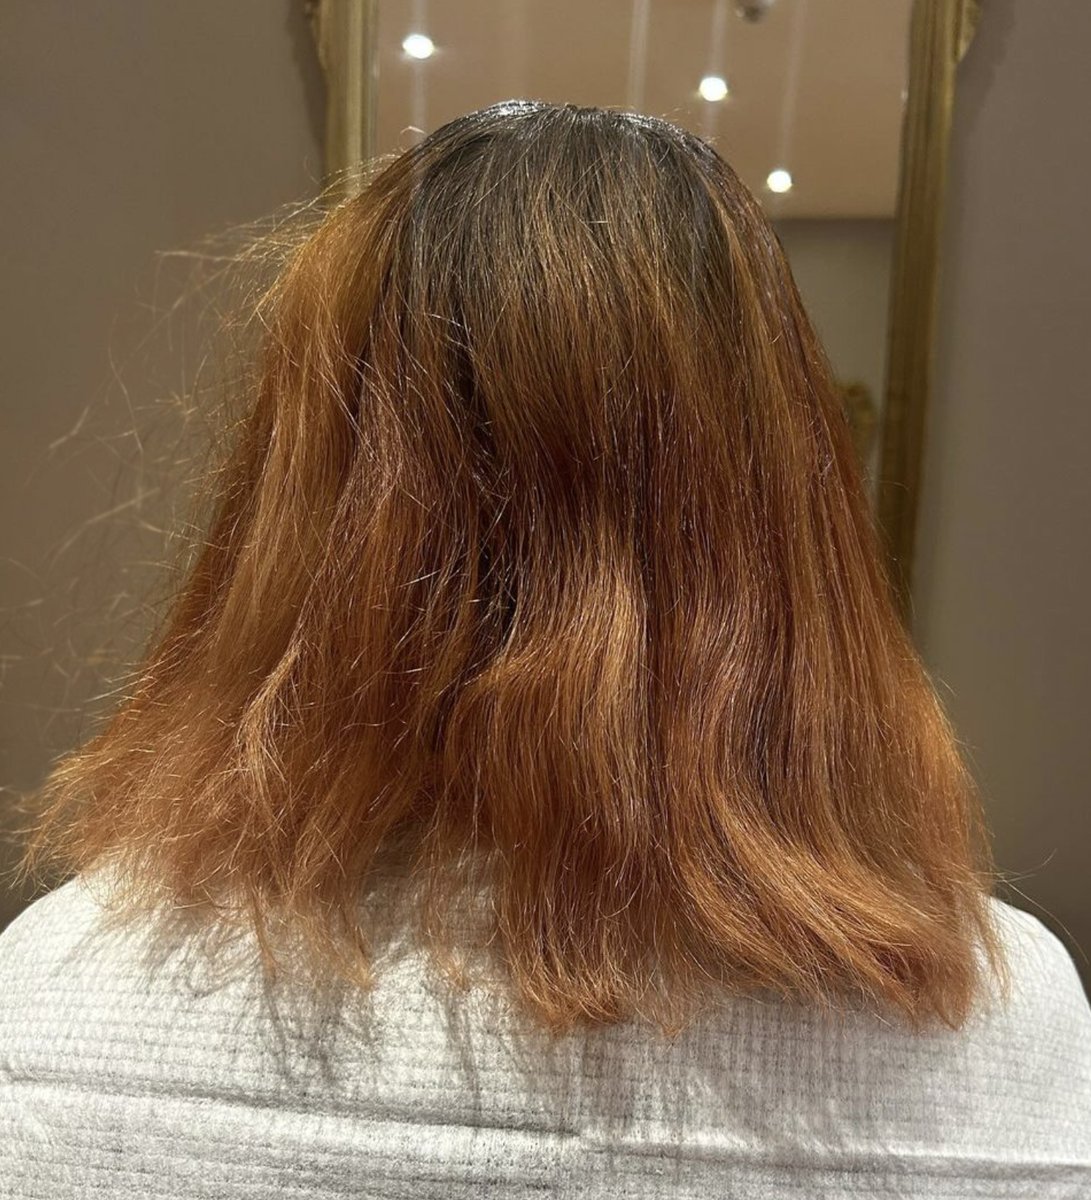 Feeling summery with this bright beautiful copper by Senior Stylist, Amelia at RJ Sherborne.
#robinjamesaveda #robinjamessalons #robinjamessherborne #robinjamesdorchester #avedauk #avedacolor #avedapro #avedaartist #avedasalon #avedalifestylesalon #copperhair